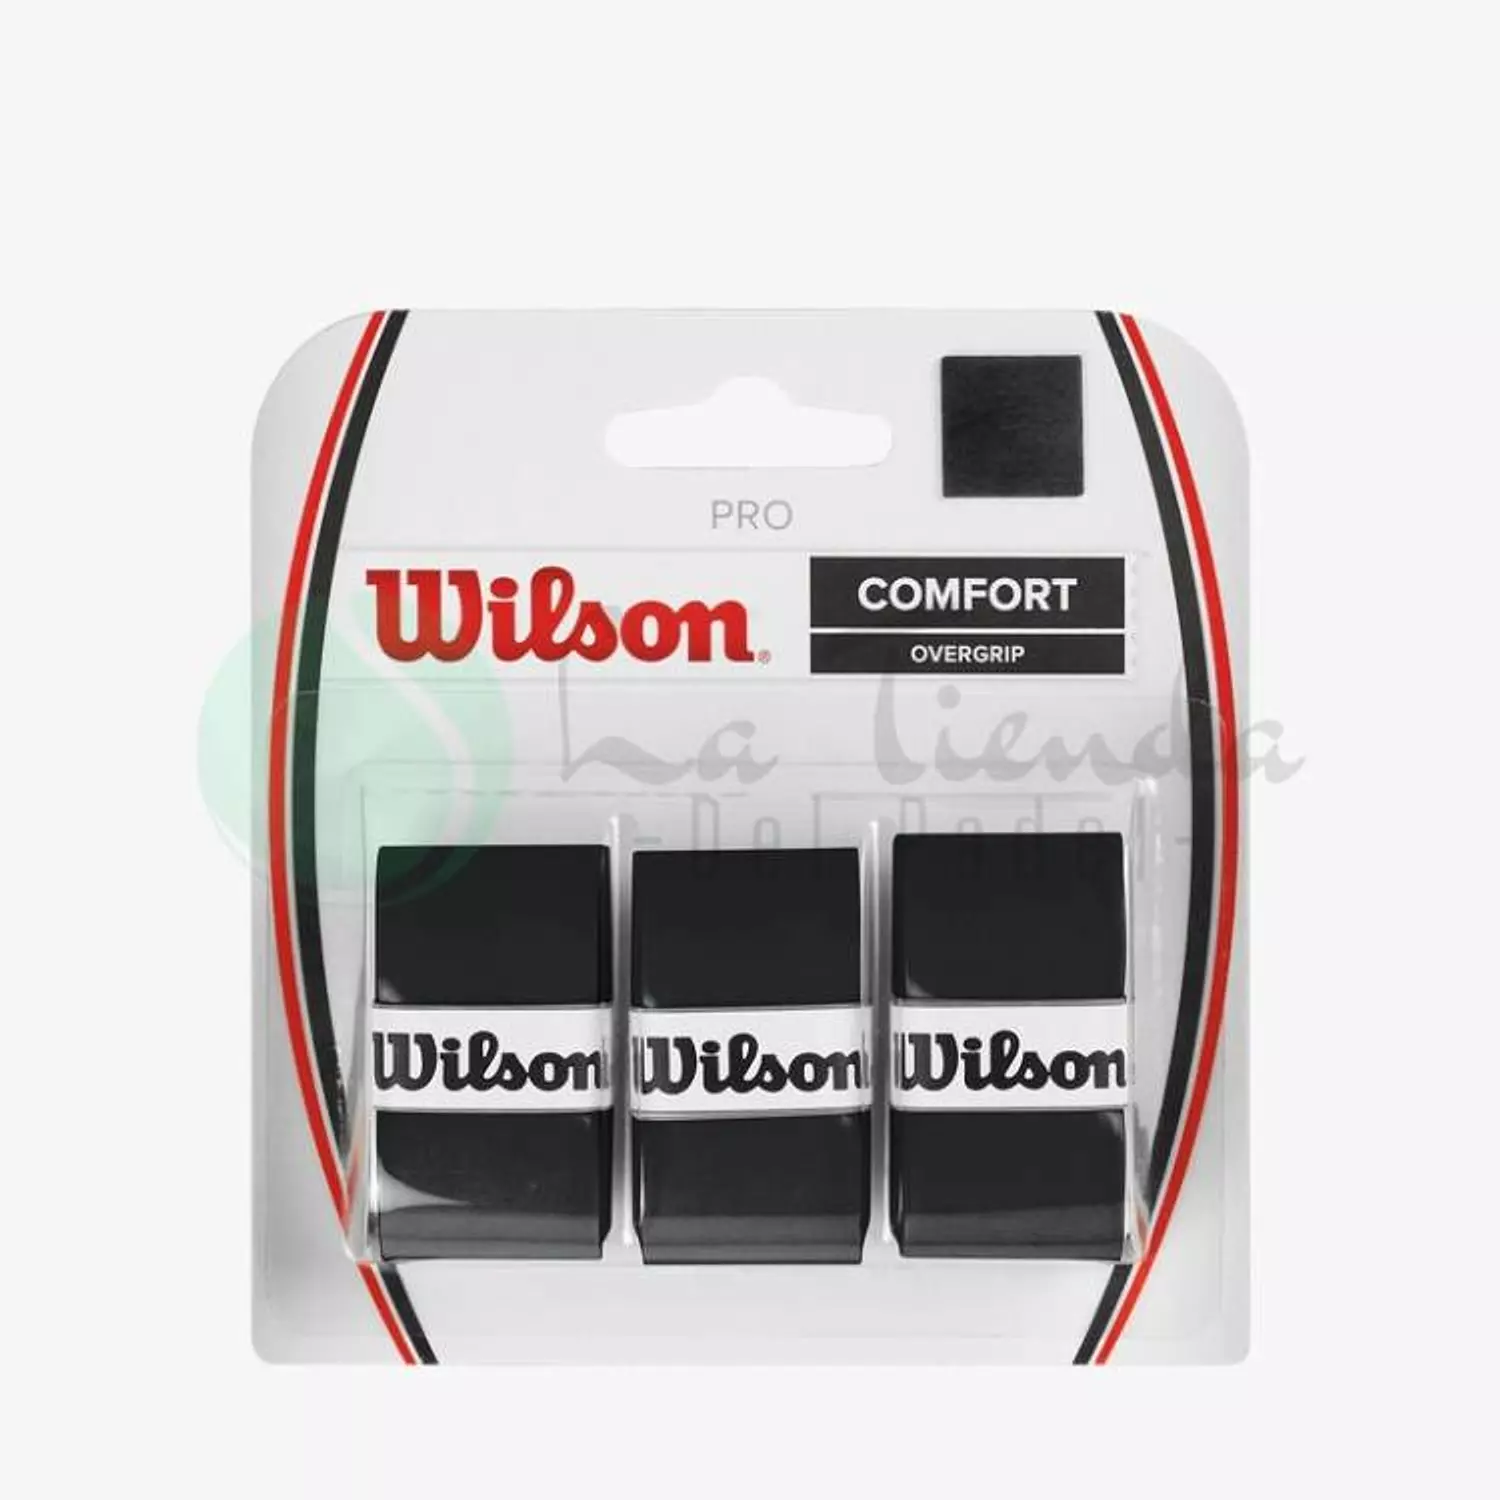 Wilson Pro Comfort Black Overgrip (Pack of 3) hover image